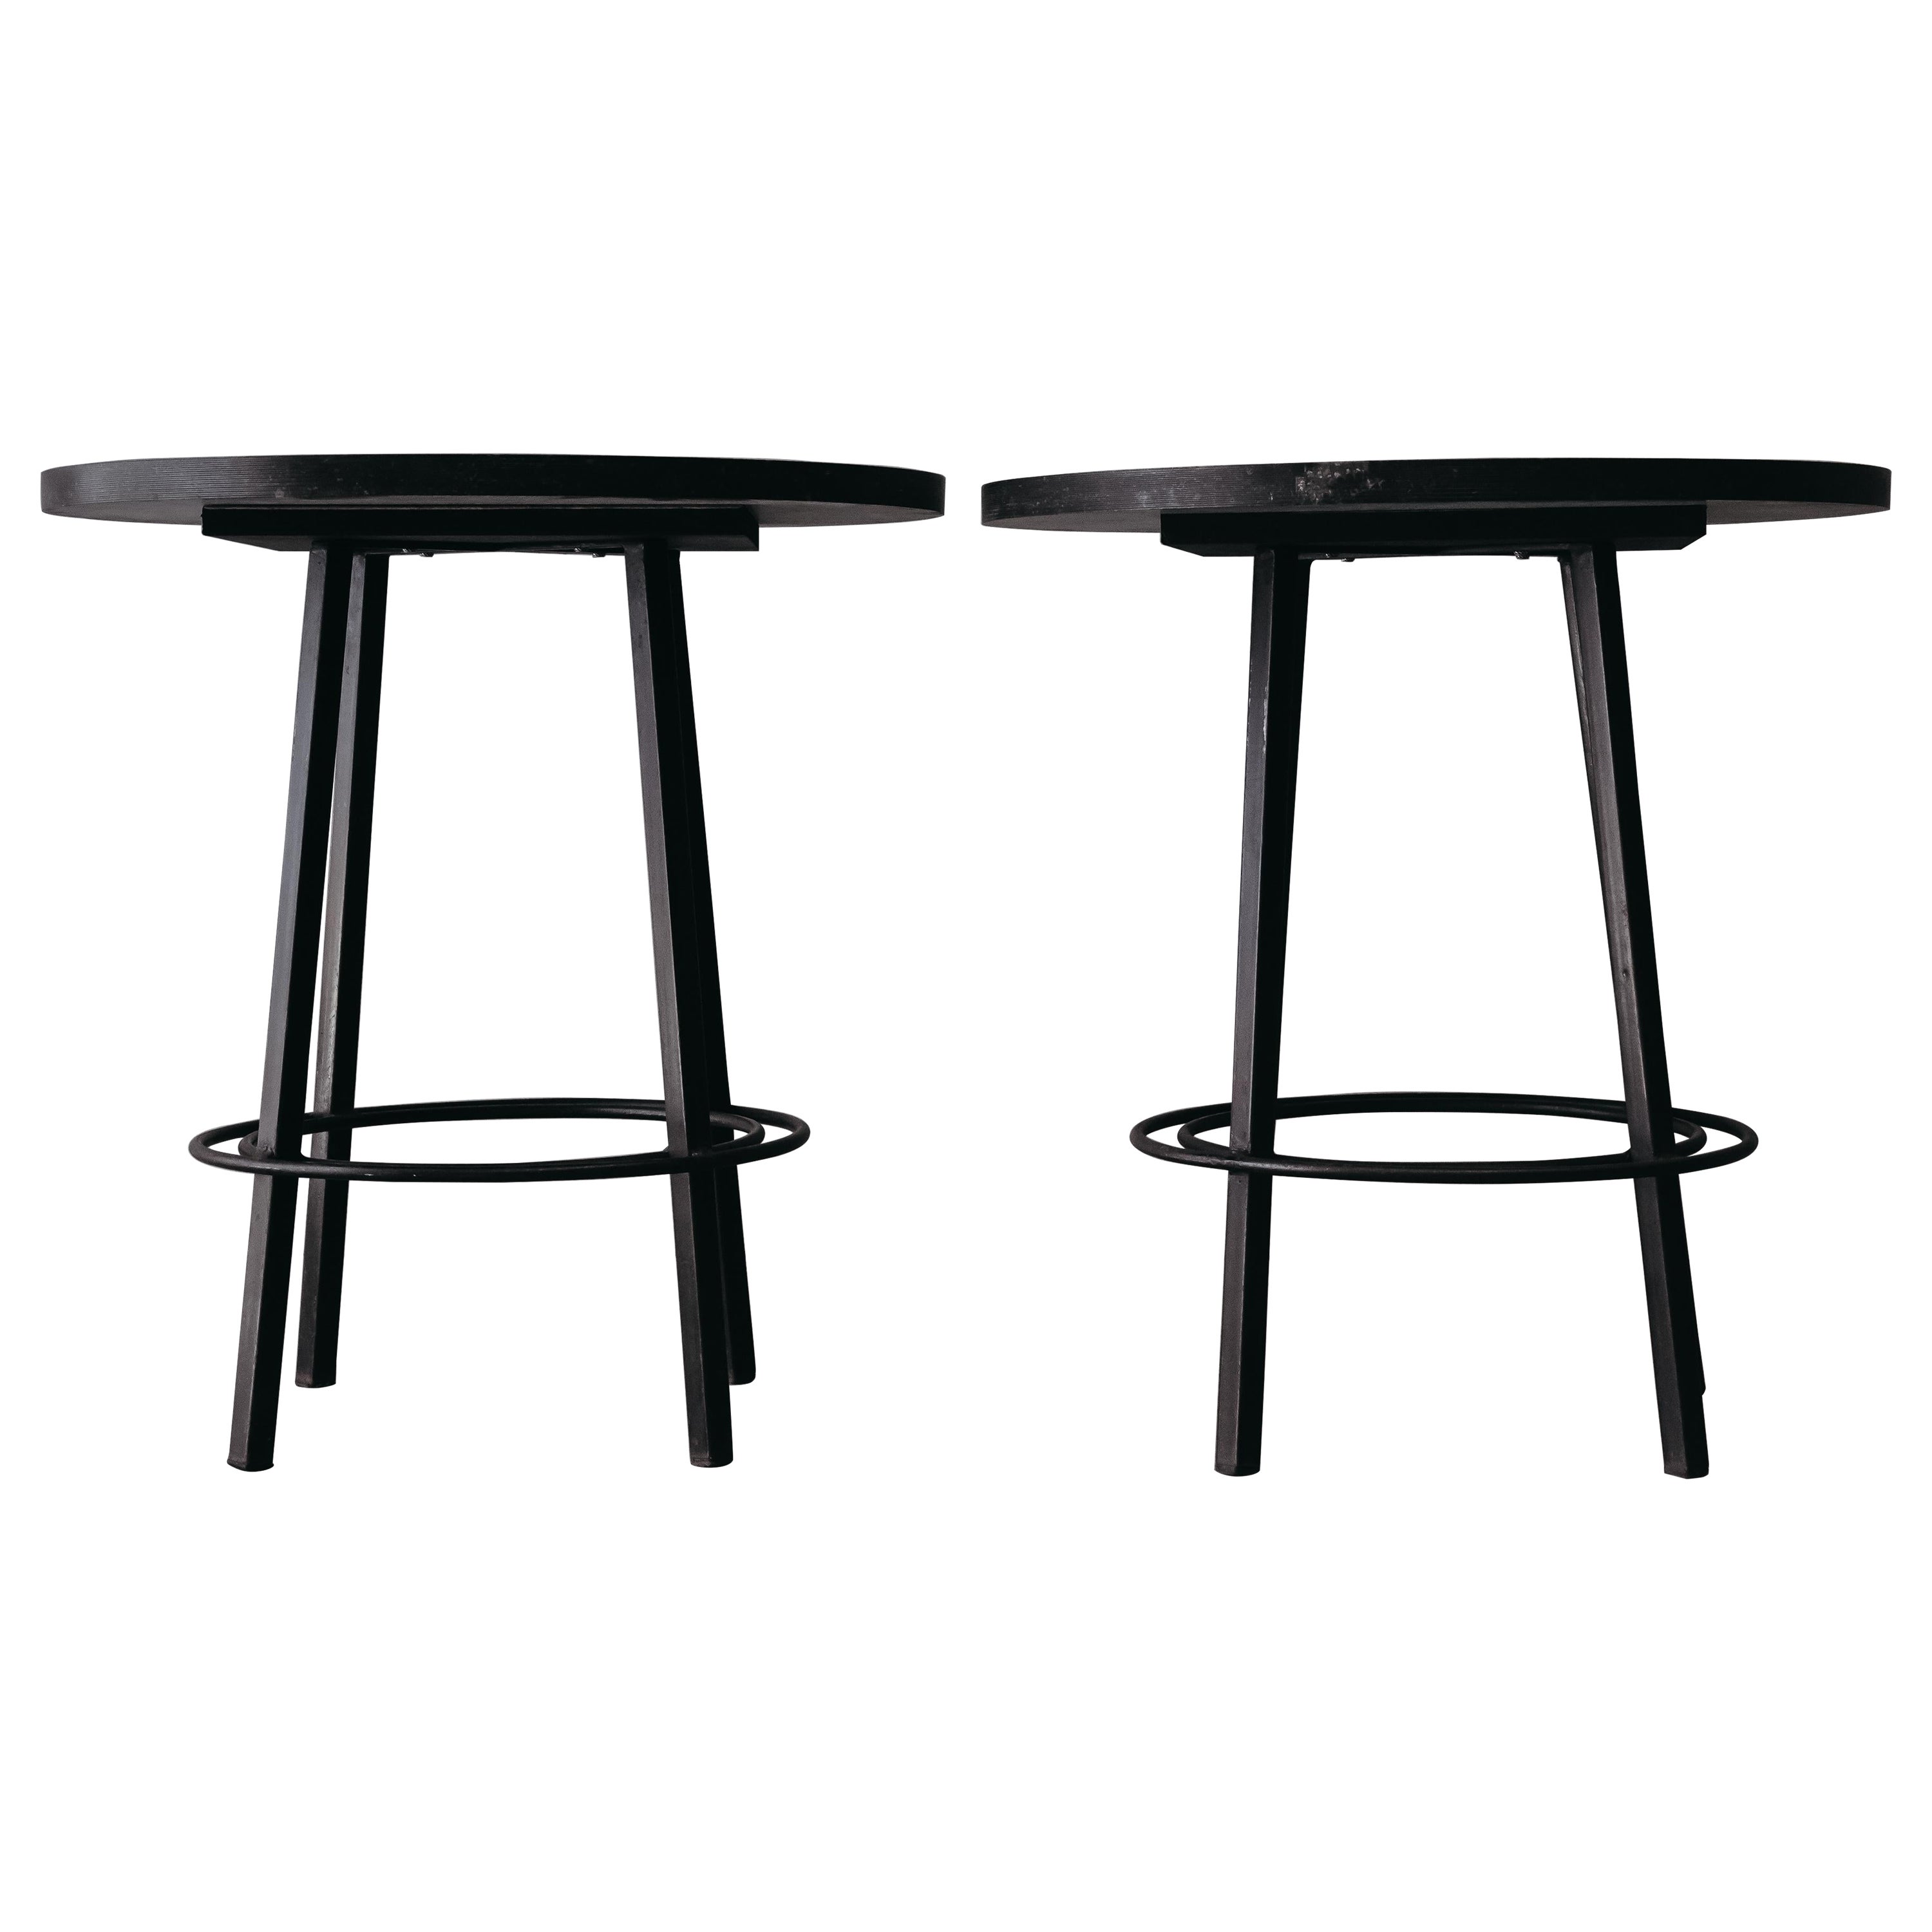 Vintage Pair of Stone Bistro Tables from France, circa 1970